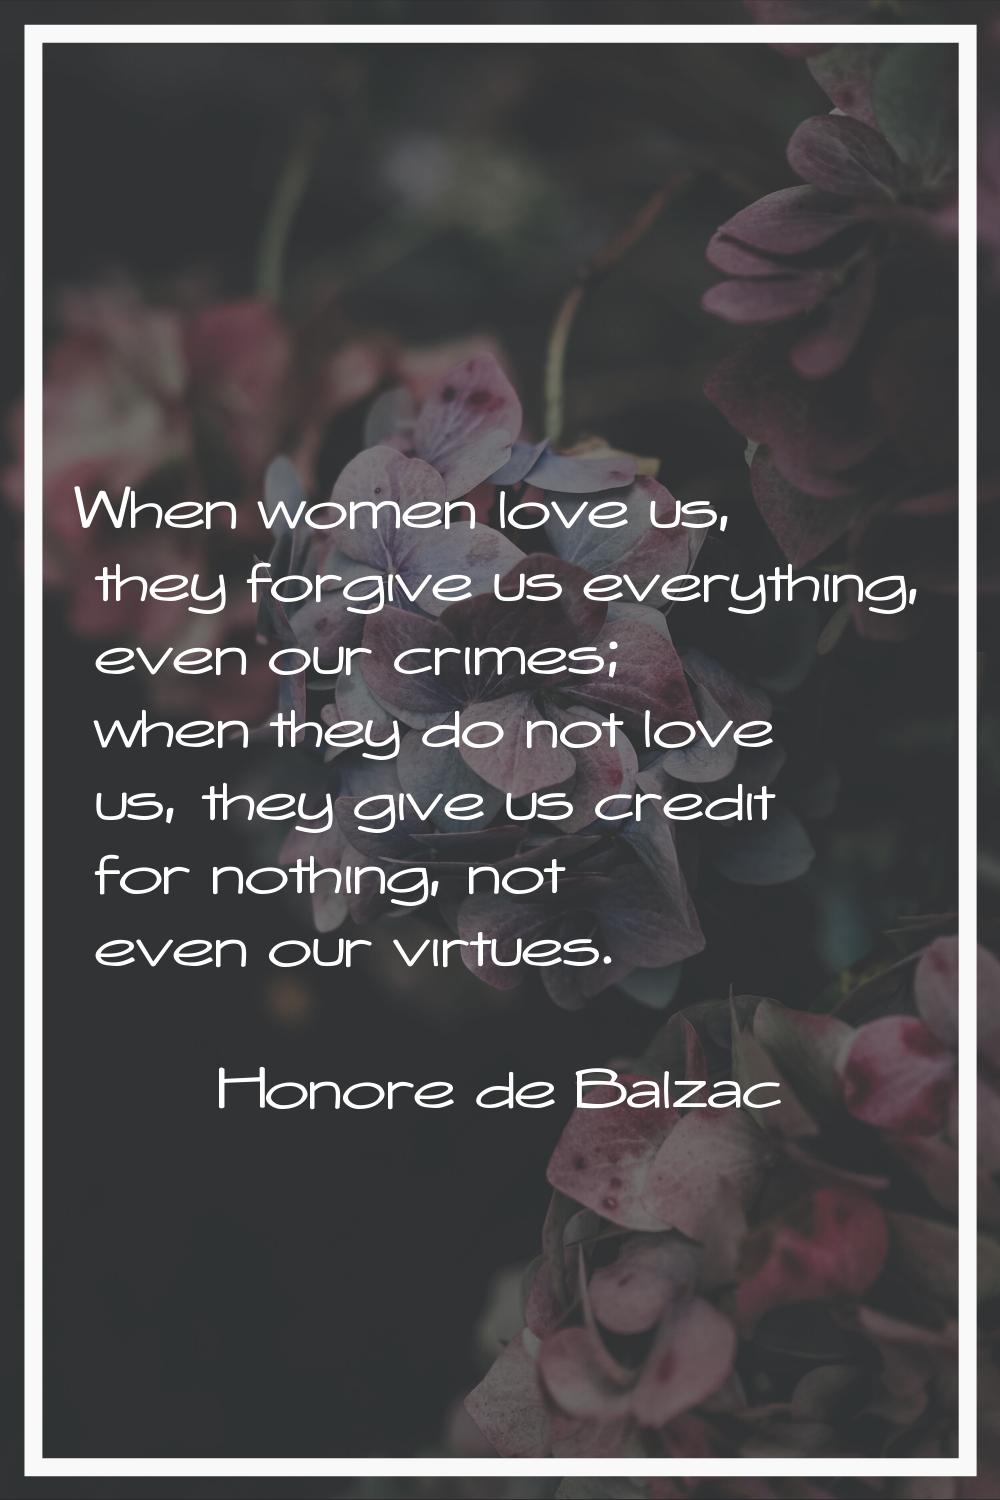 When women love us, they forgive us everything, even our crimes; when they do not love us, they giv